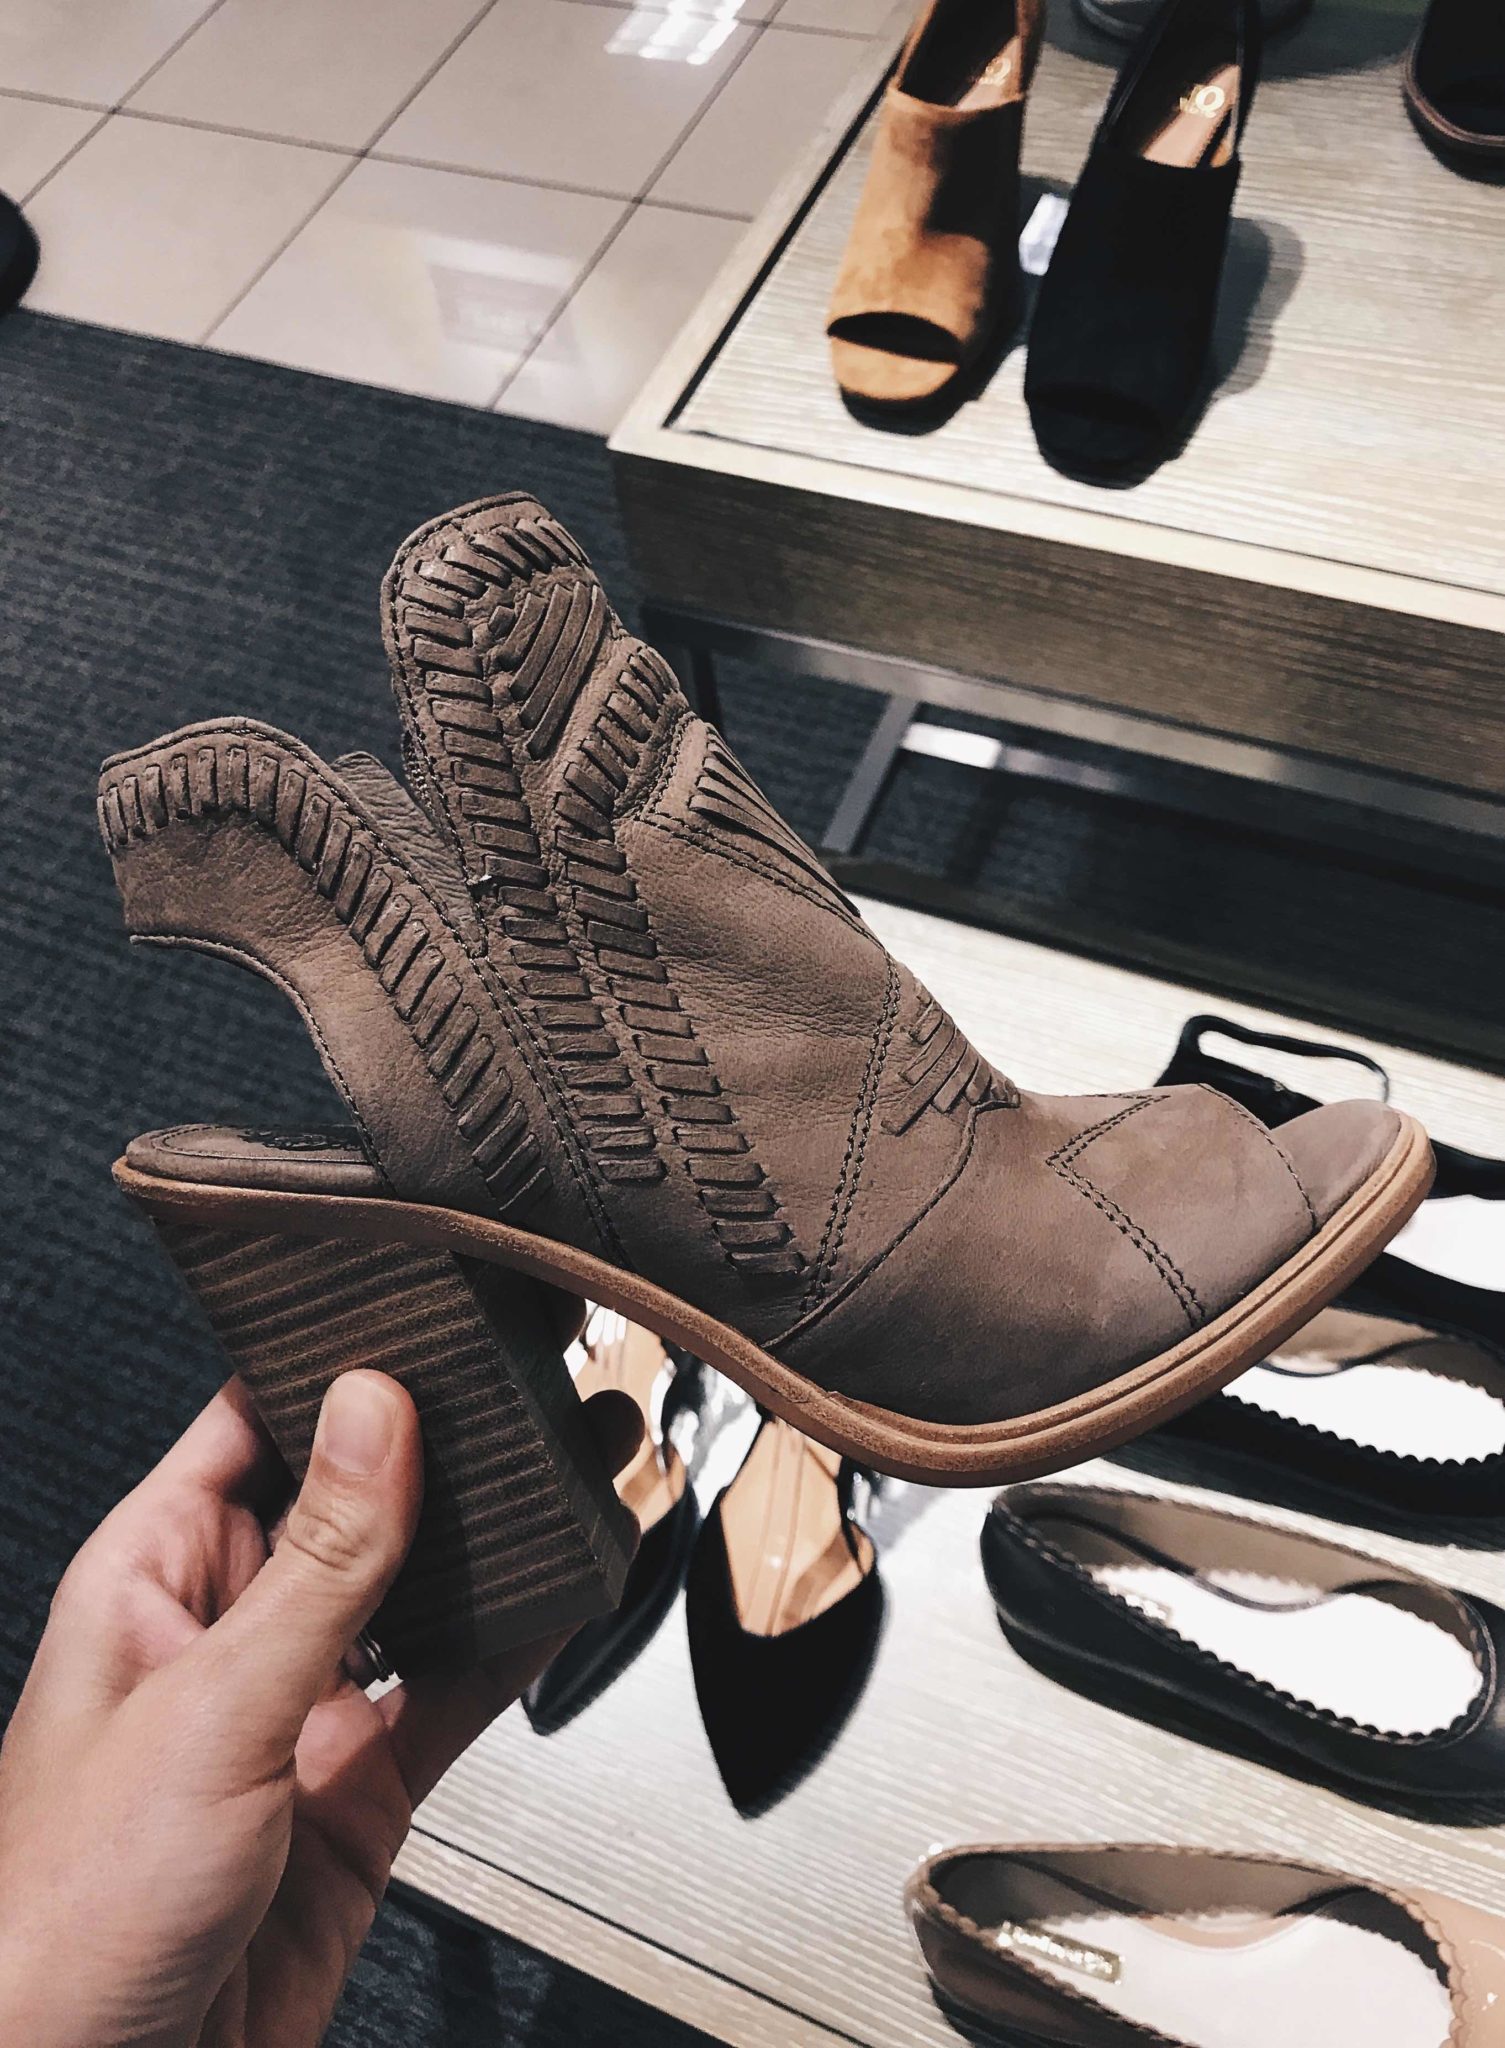 Austin Blogger DTKAustin is sharing her top must-have pieces from the 2017 Nordstrom Anniversary Sale. Vince Camuto Suede Booties | nordstrom sale must haves | what to buy from the nordstrom anniversary sale || Dressed to Kill